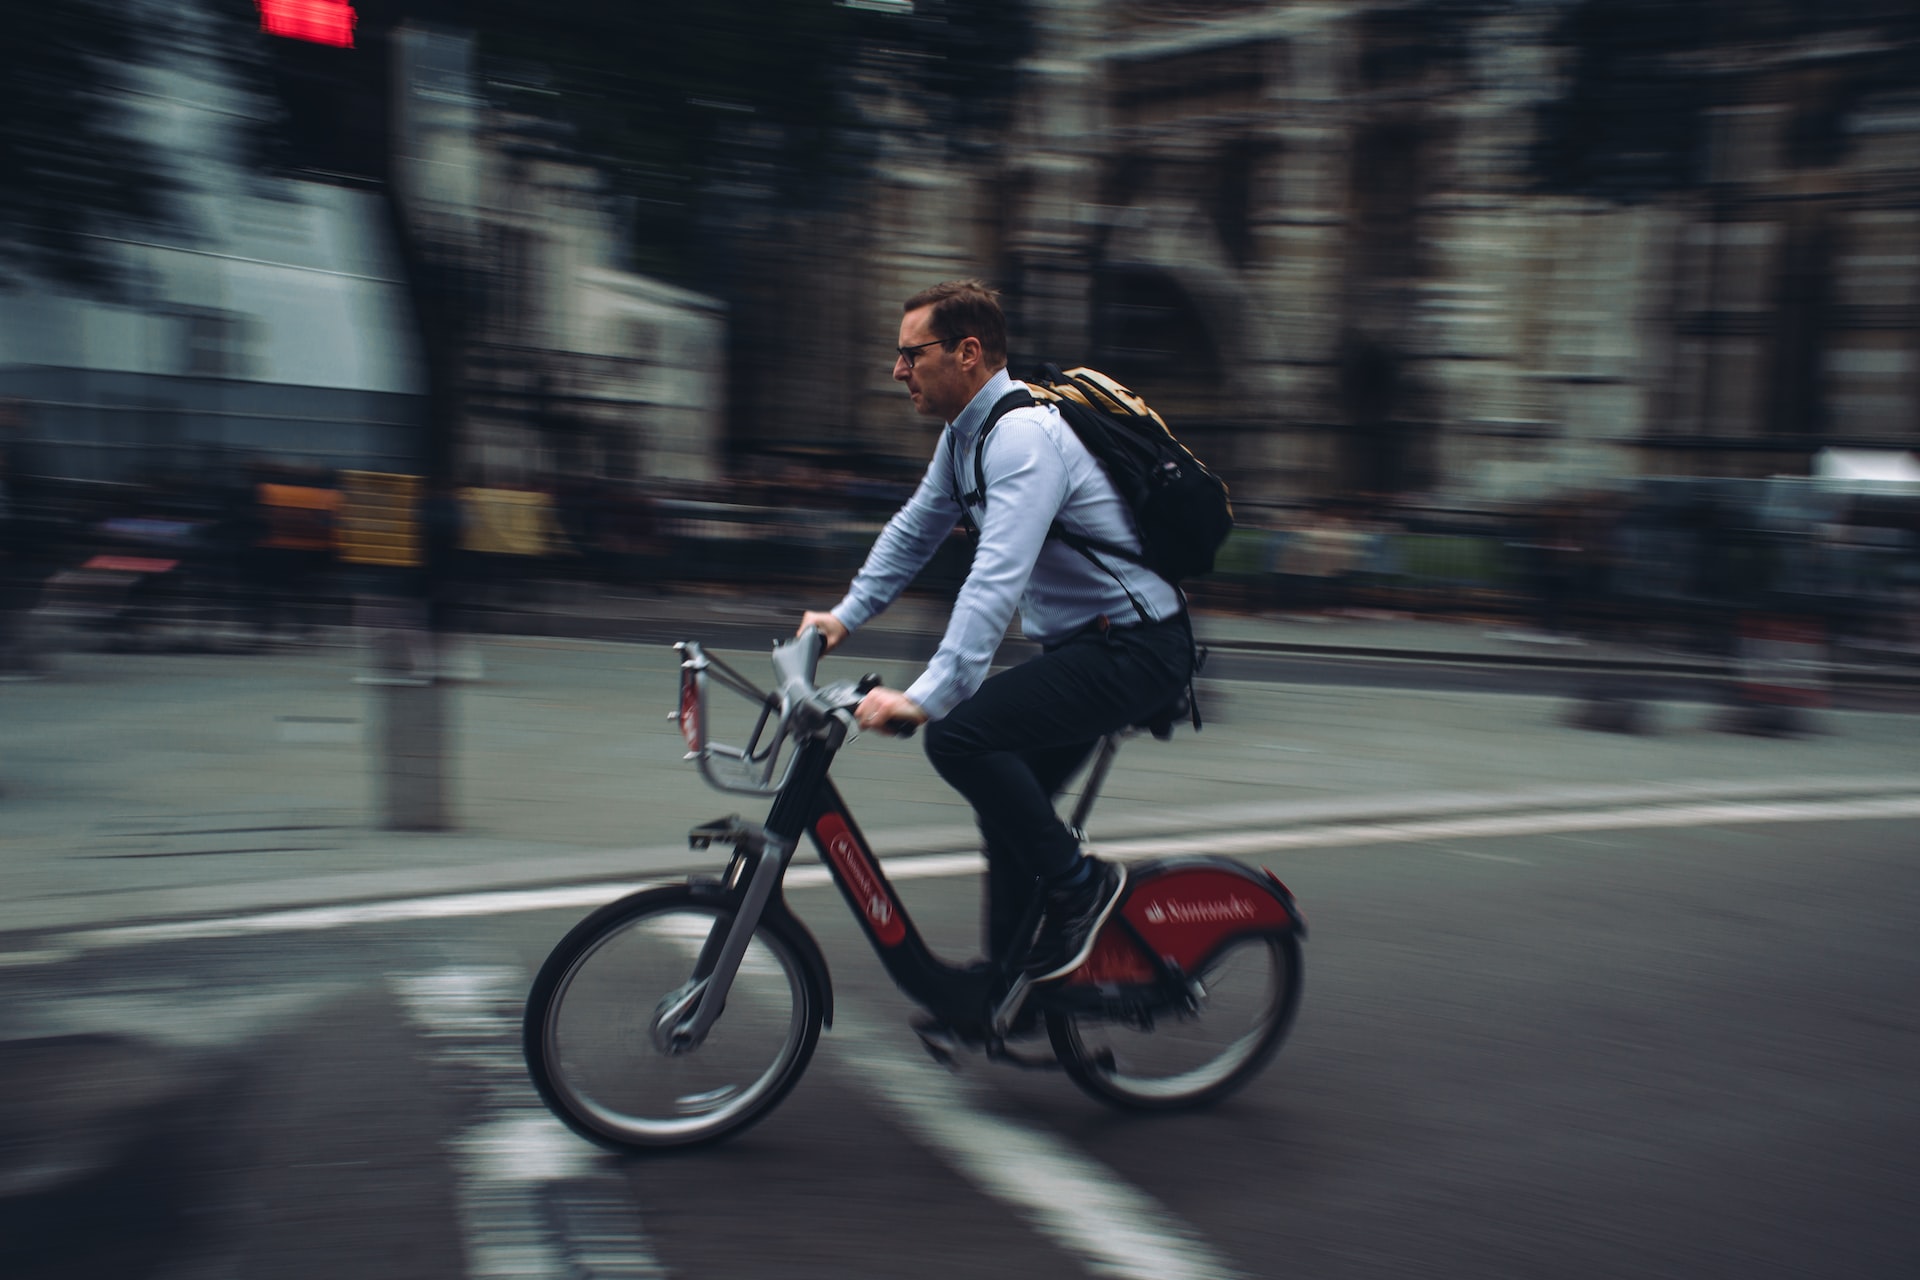 man-cycling-through-a-busy-street-on-his-way-to-work